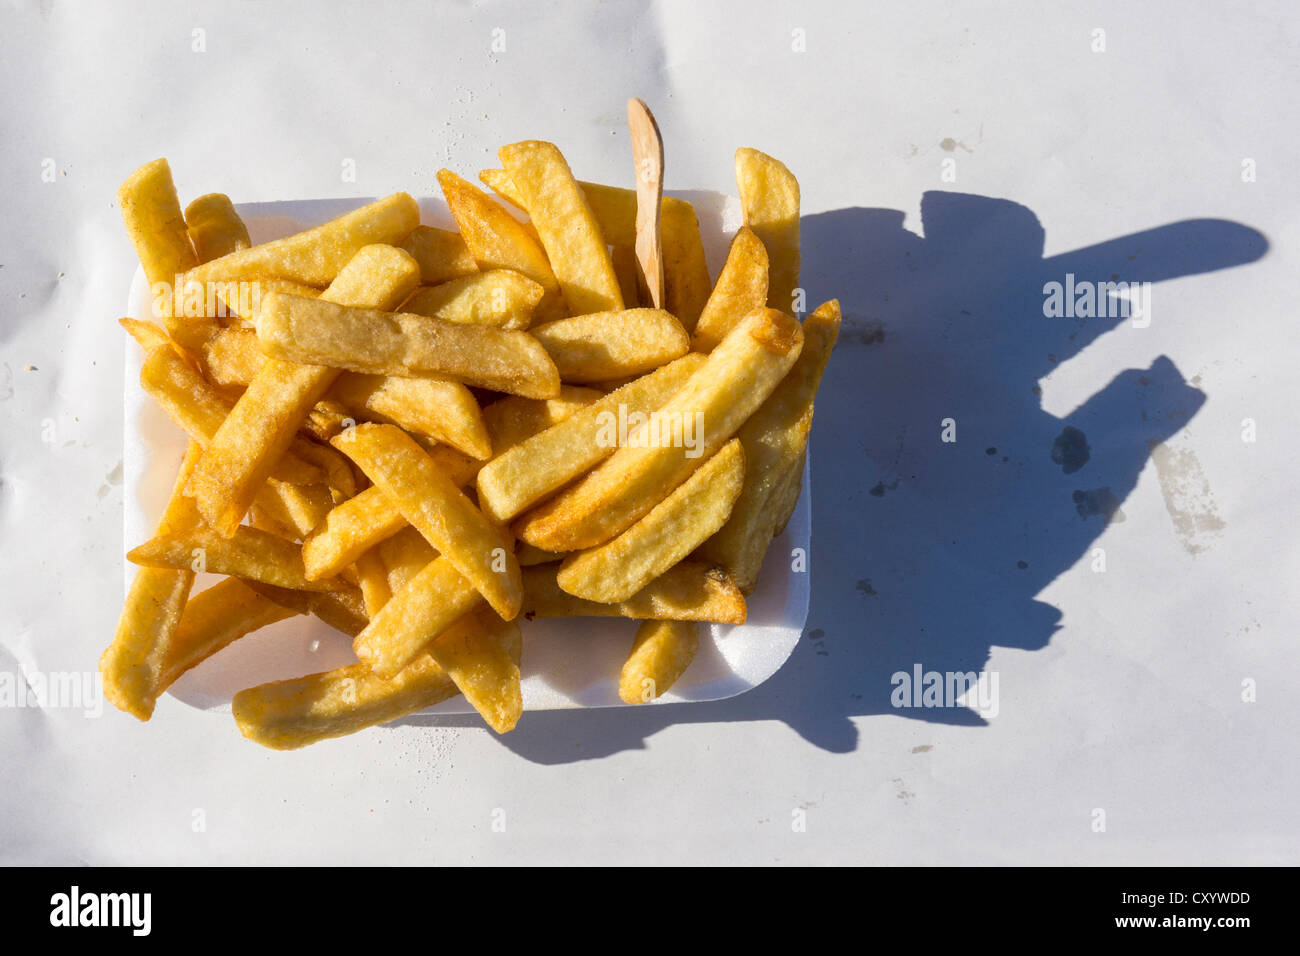 Chips portion on paper outdoors Stock Photo